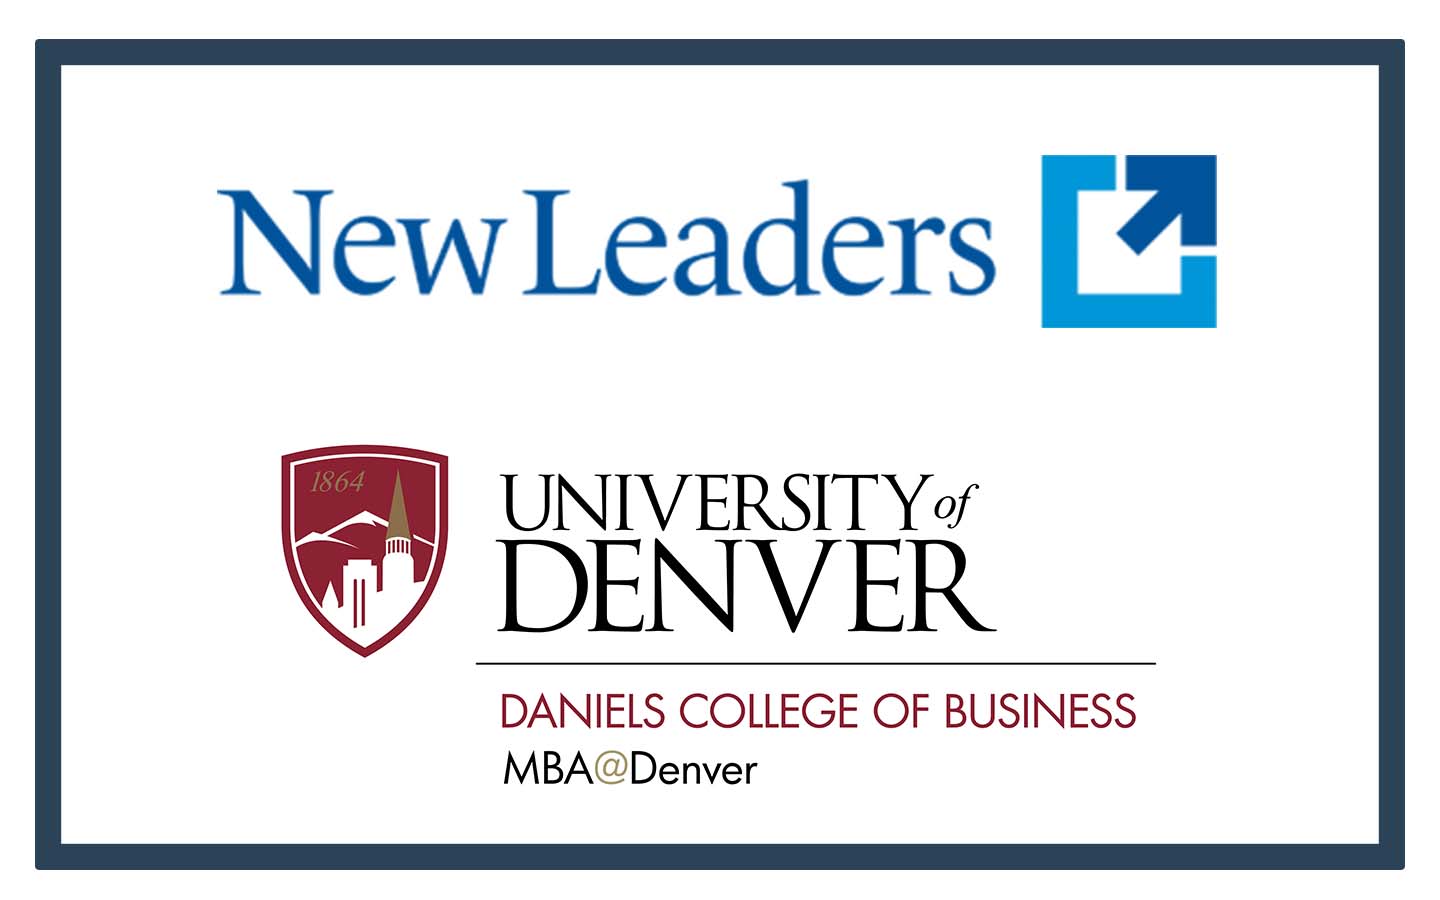 Steve White New Leaders and DU Daniels College of Business